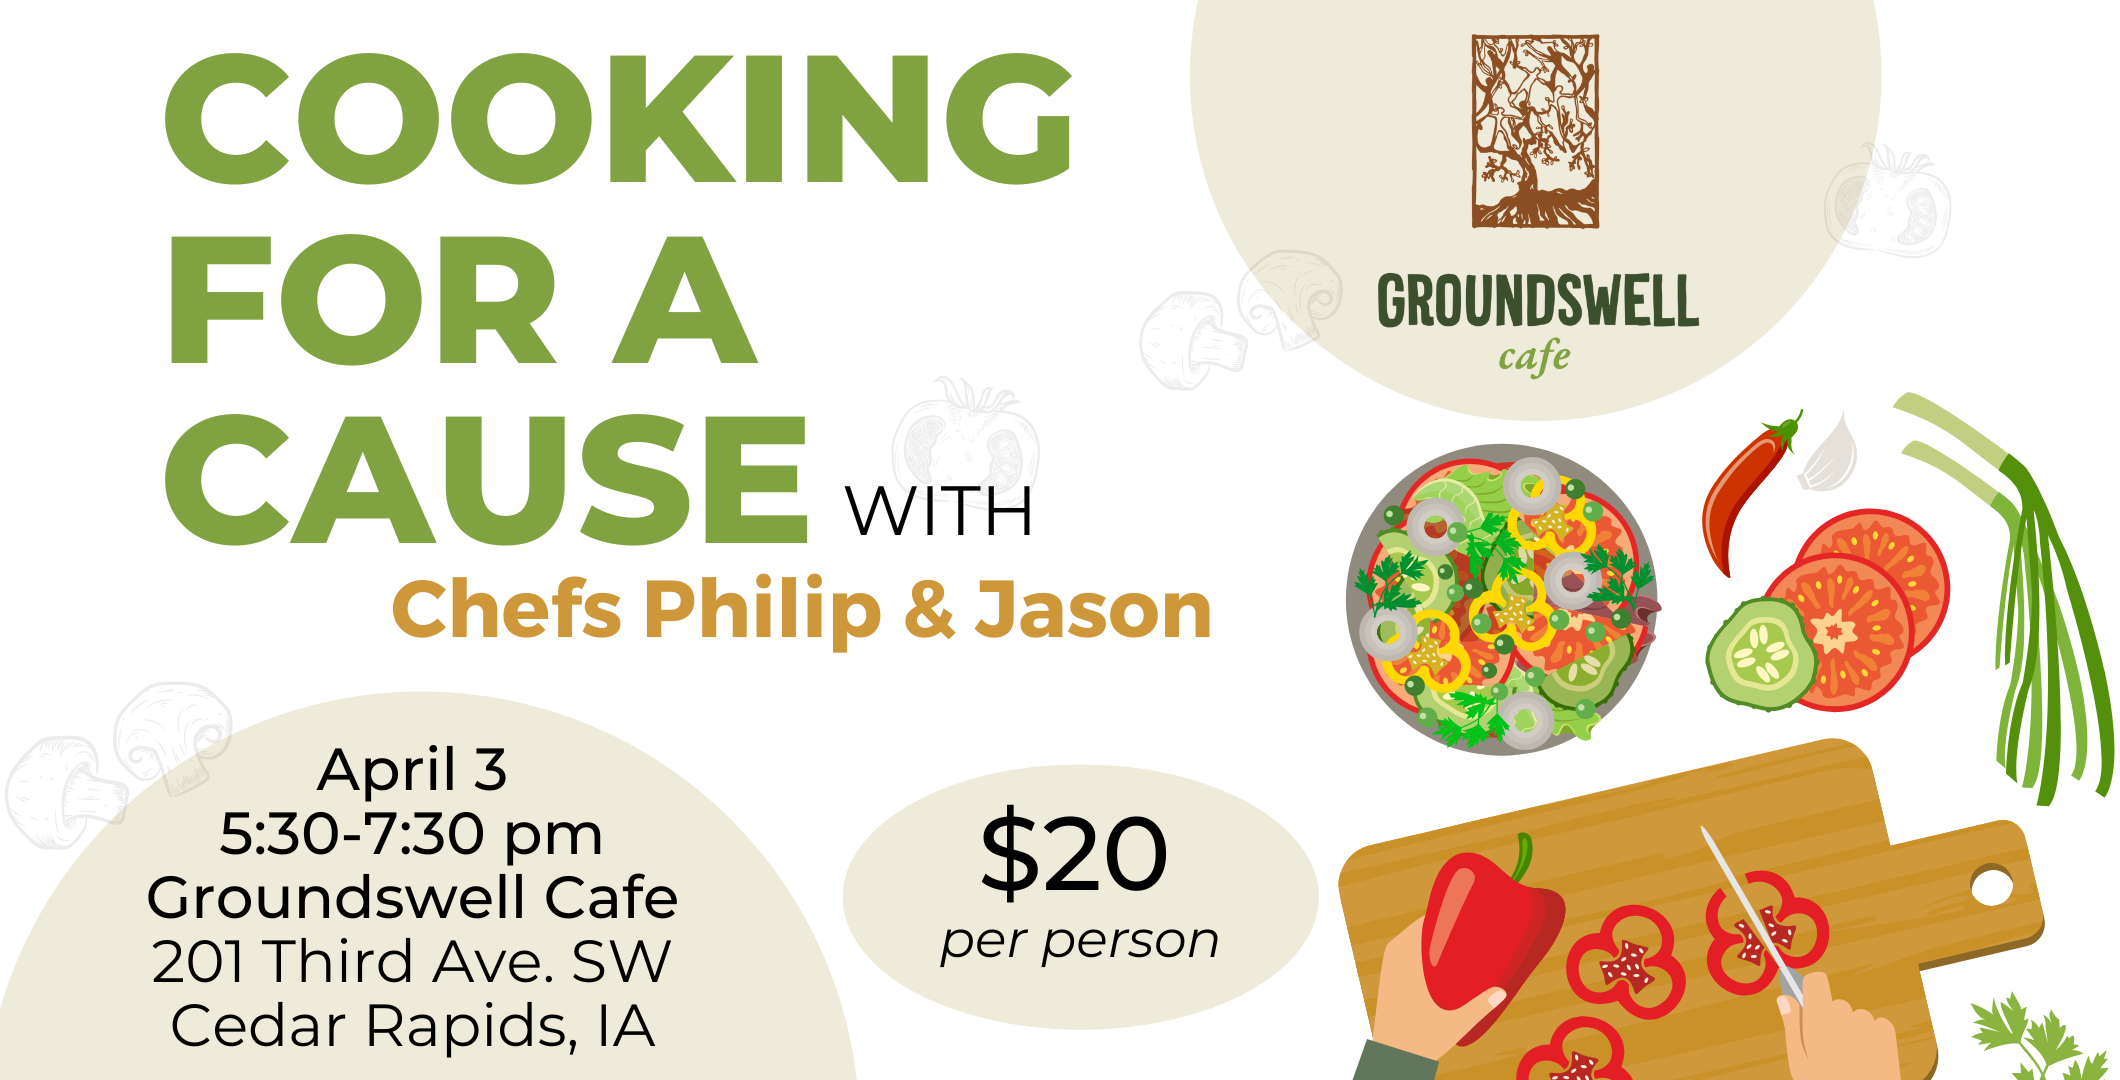 Cooking for a Cause at Matthew 25's Groundswell Cafe, is a $20 class on April 3, 2023